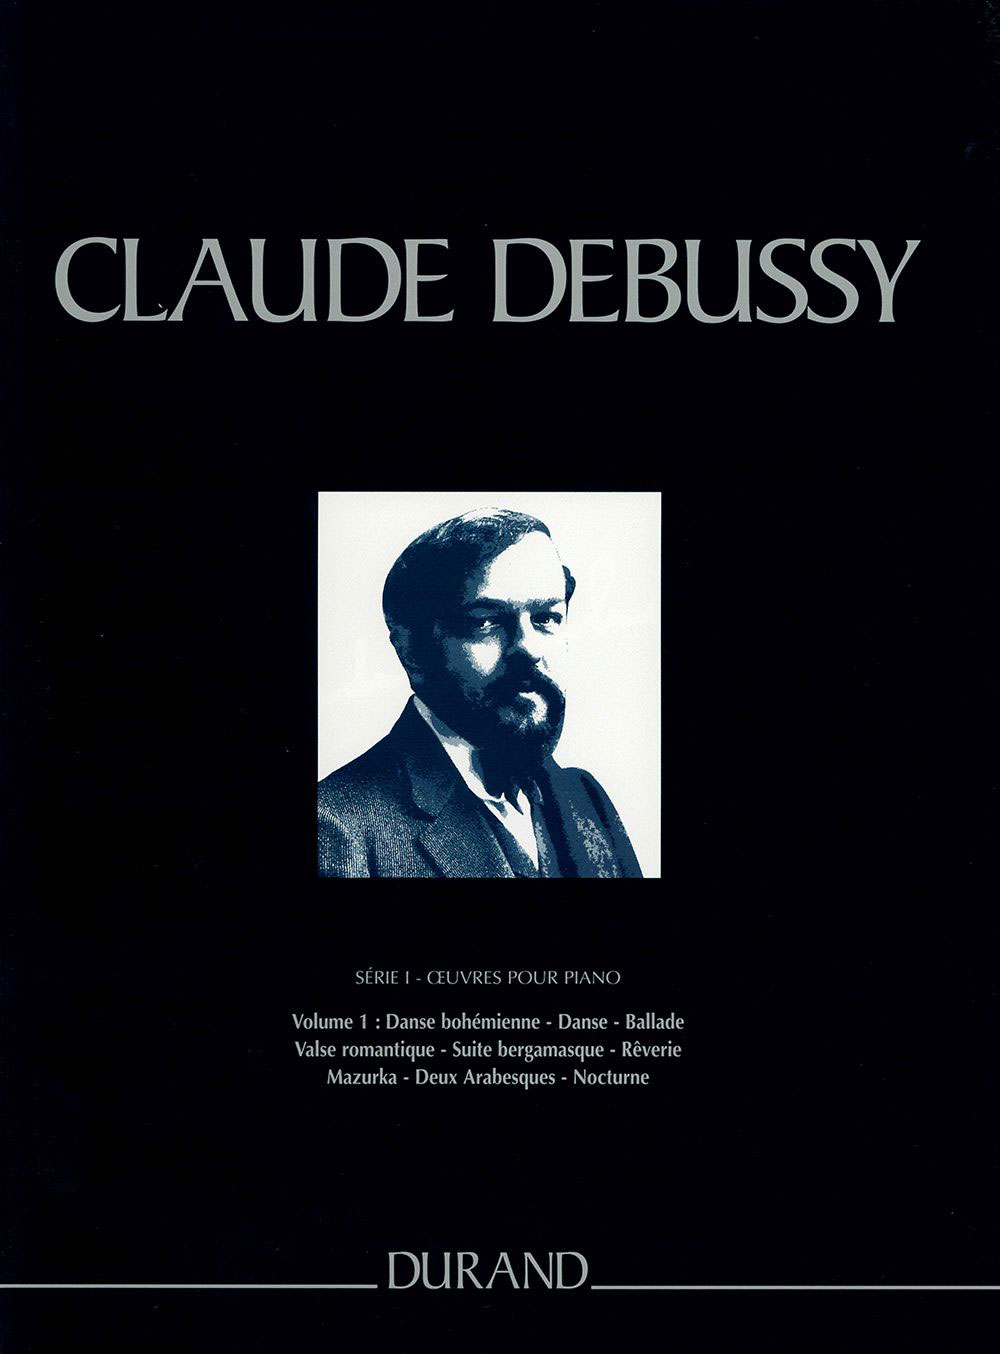 DURAND DEBUSSY CLAUDE - OEUVRES COMPLETES SERIE 1 VOL 1 - PIANO